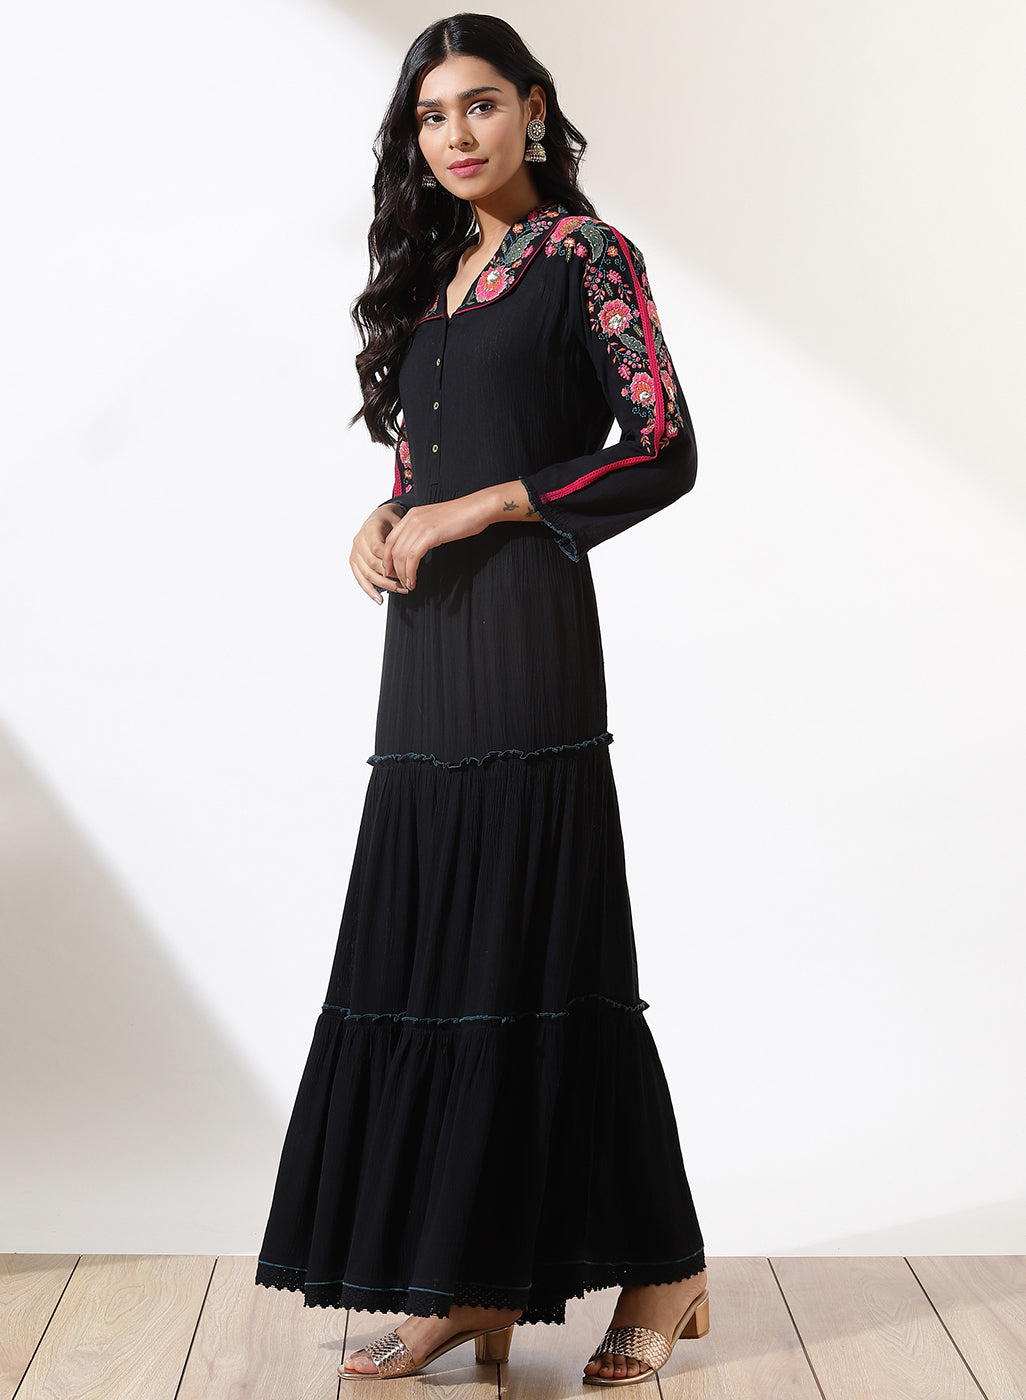 Black Frill Dress With Delicate Embroidery